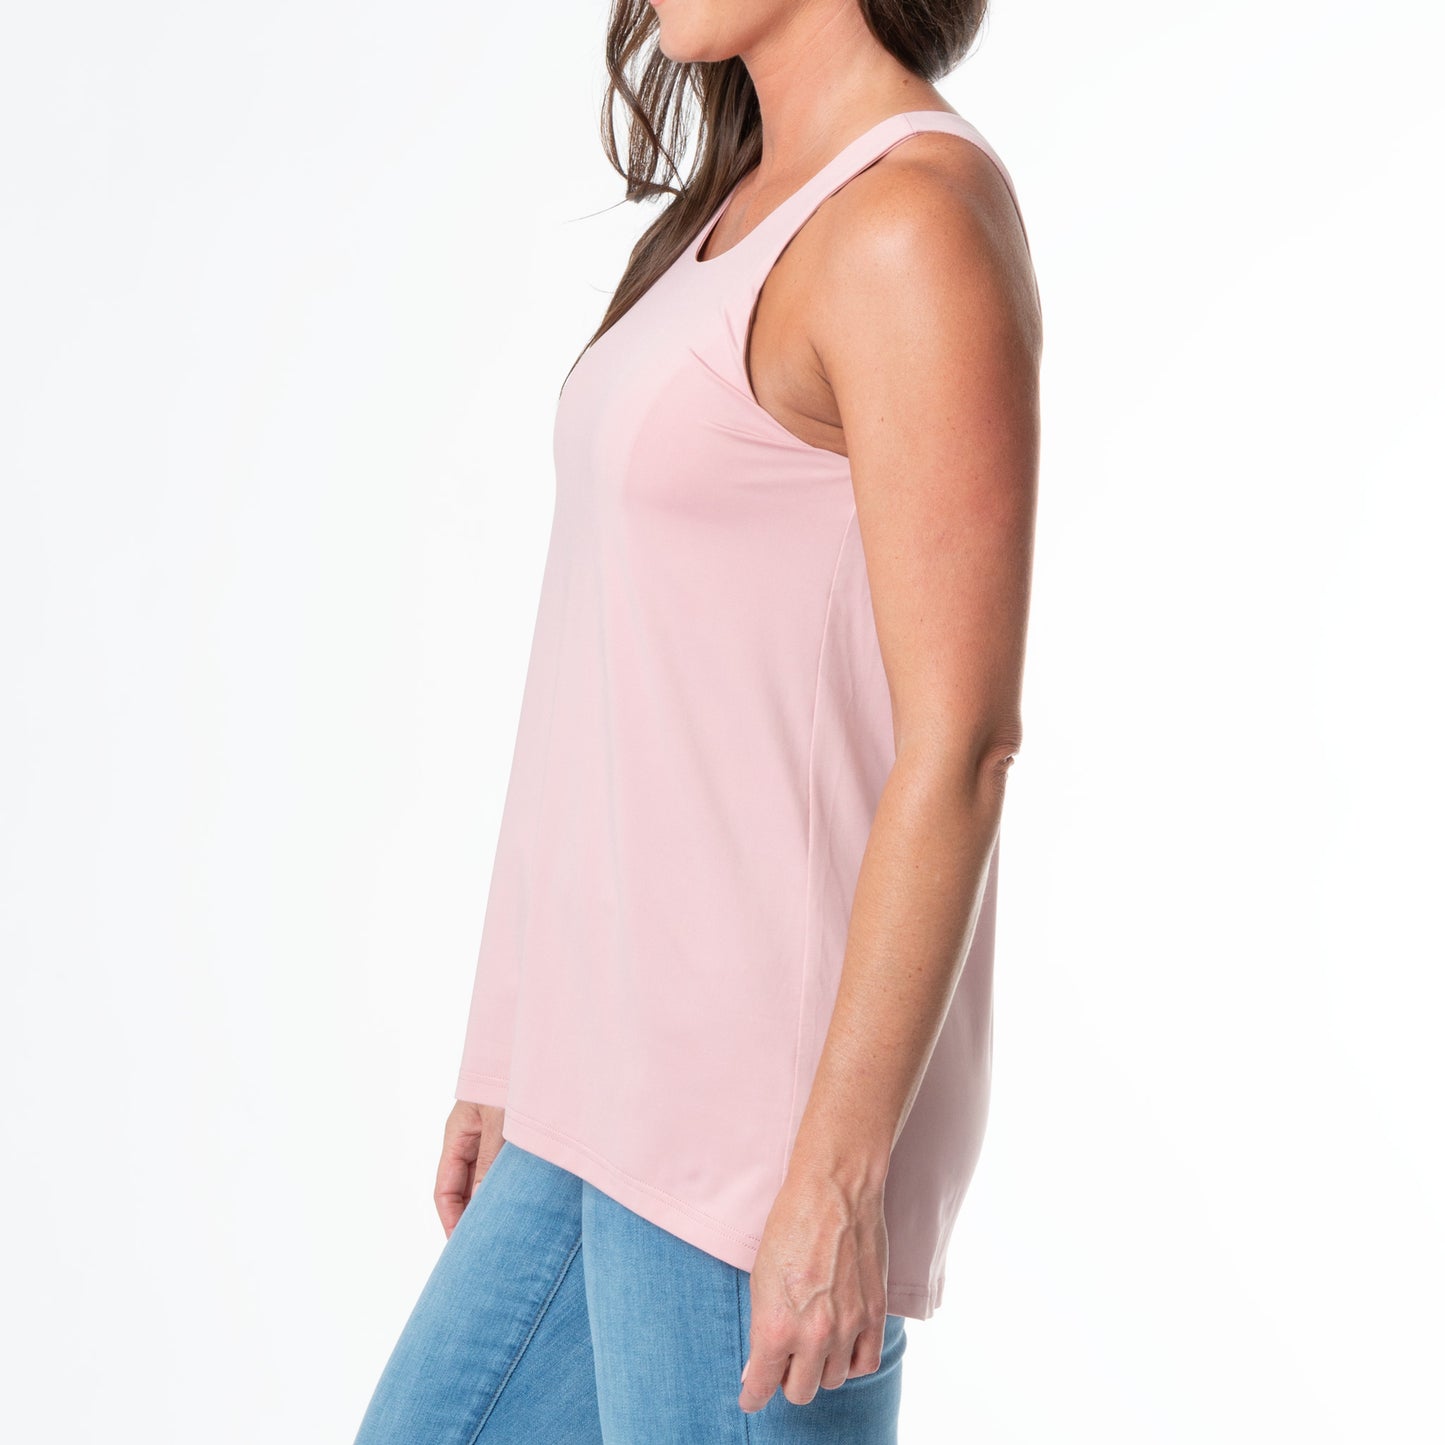 Shay Swing Tank Top with Built-in Bra